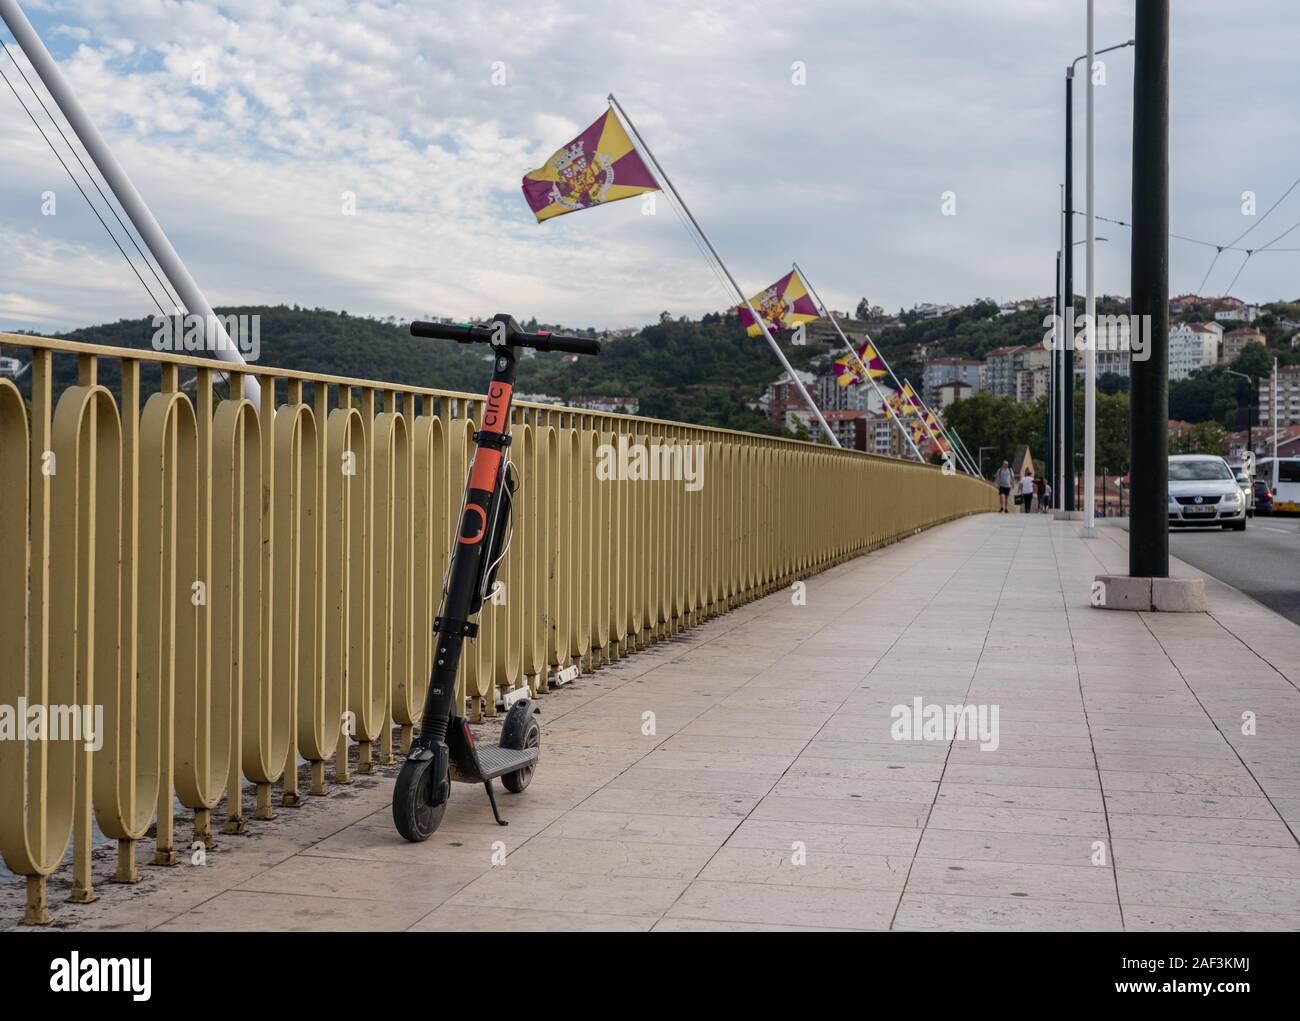 Coimbra, Portugal - 19 August 2019: Circ electric scooter parked on the Santa Clara bridge Stock Photo